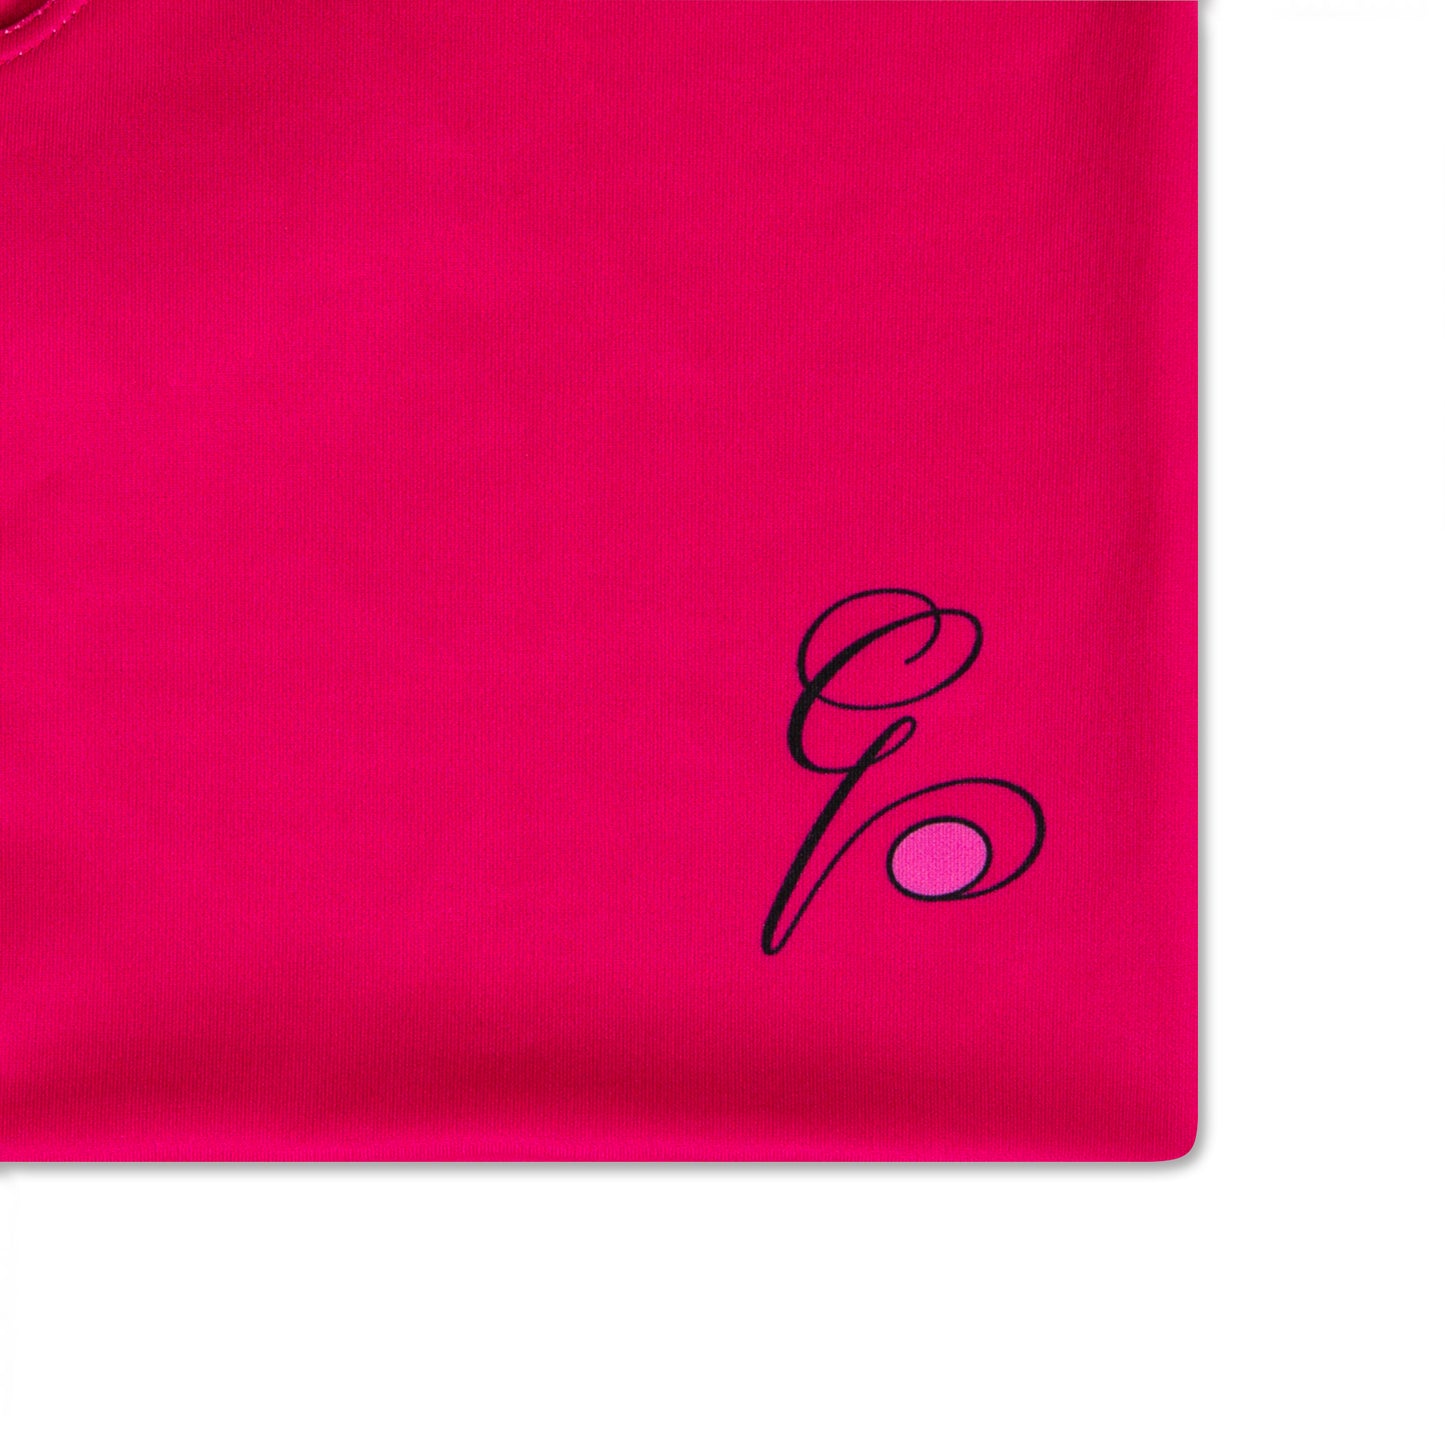 Close up of the Bolero Pink slip showing the high quality finish